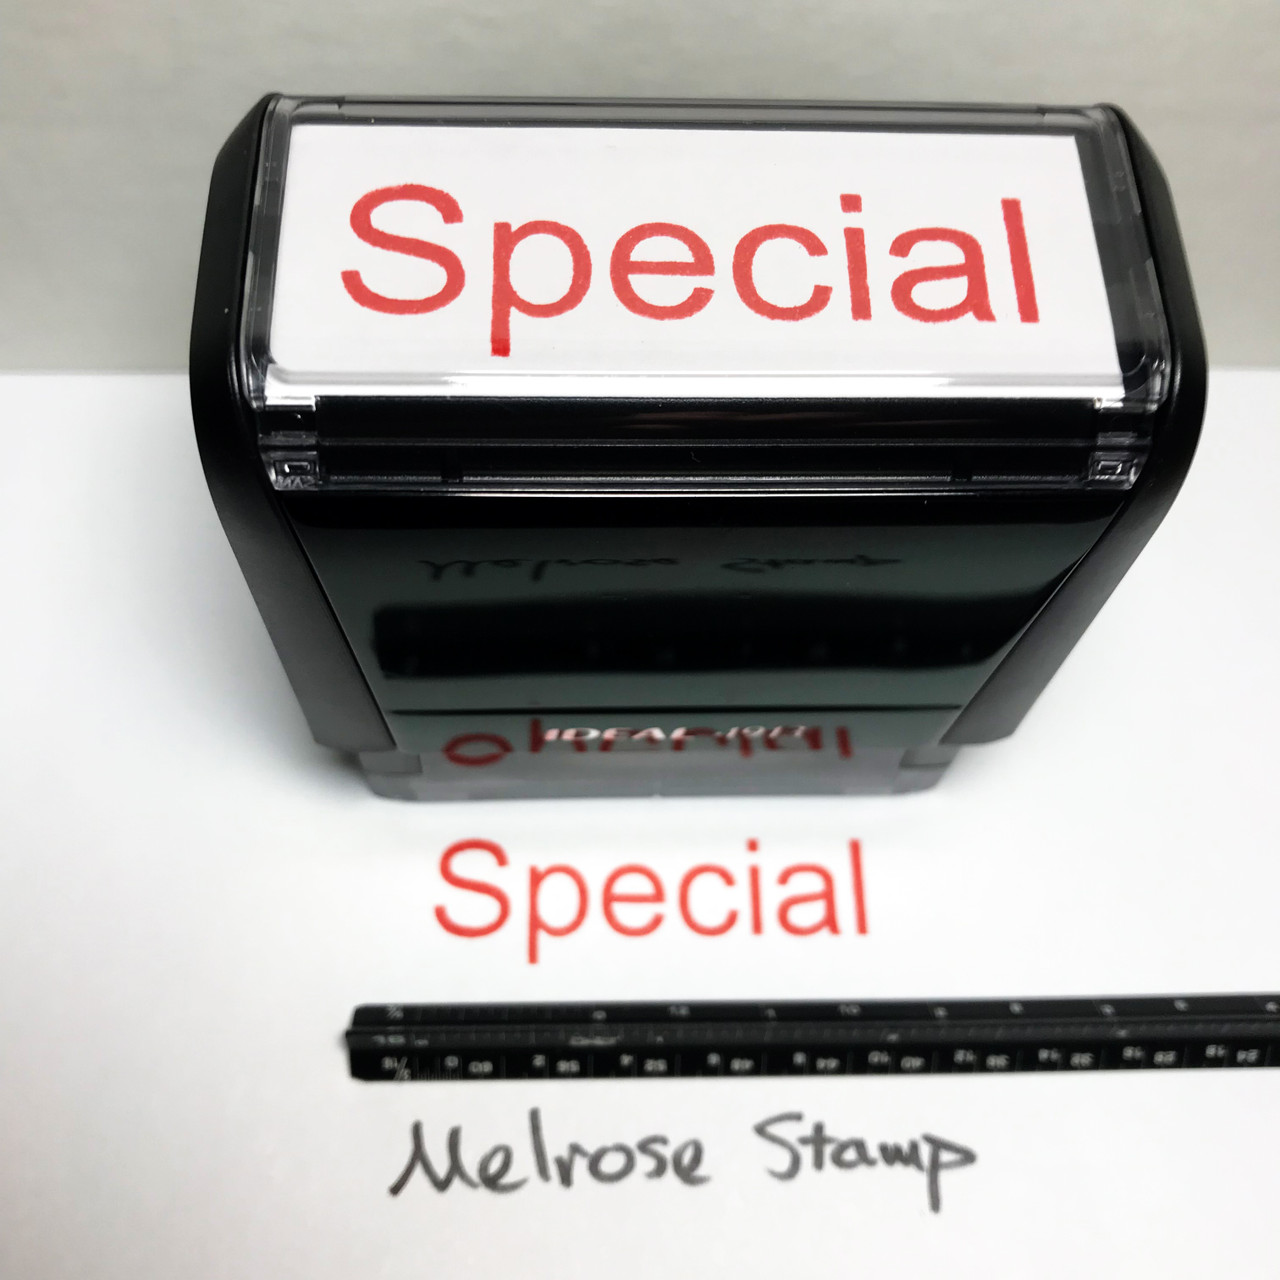 SPECIAL Rubber Stamp for office use self-inking